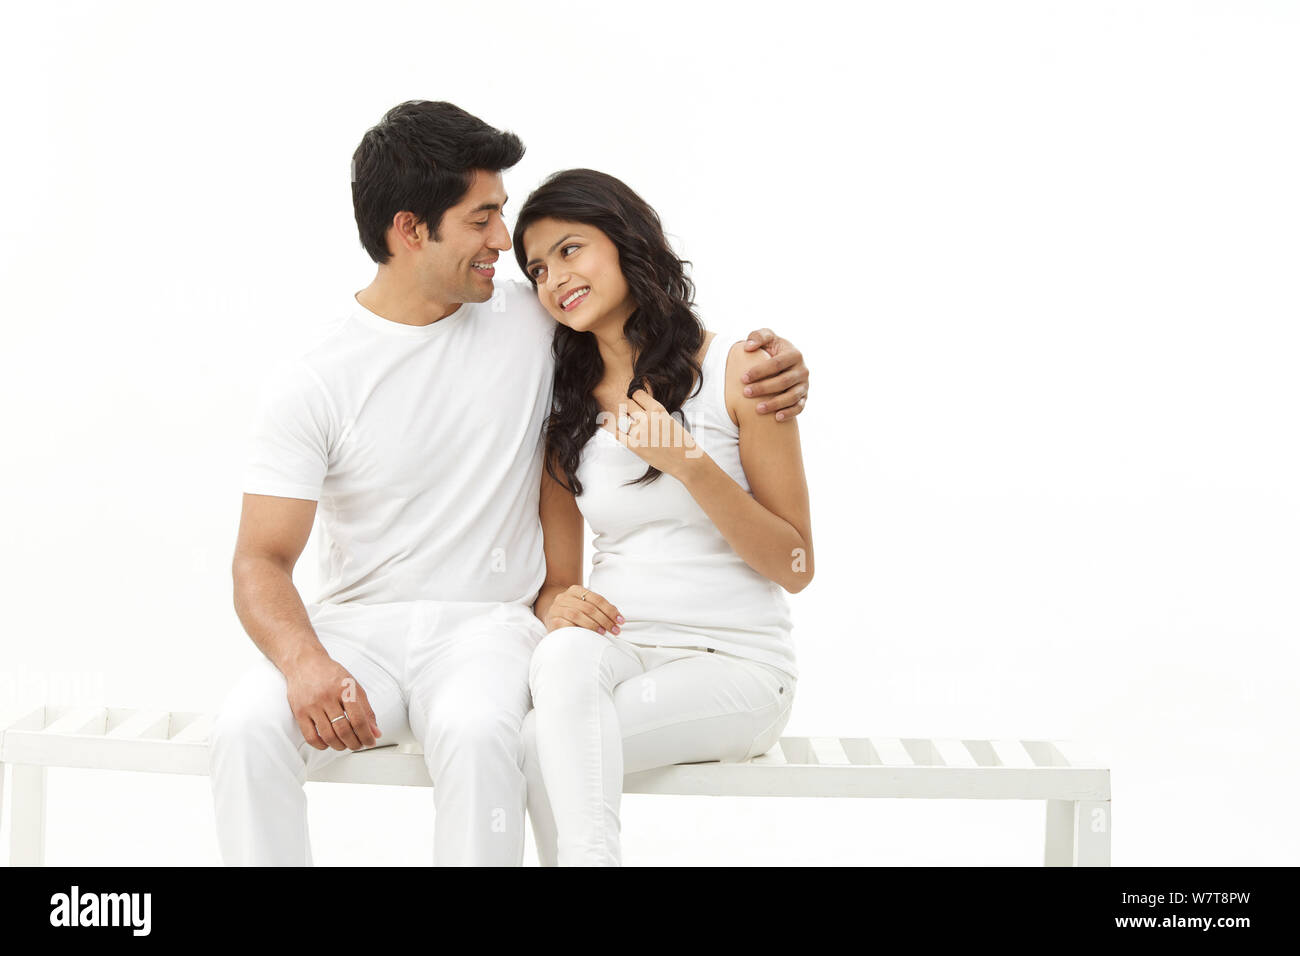 Young couple sitting on bench and smiling Stock Photo